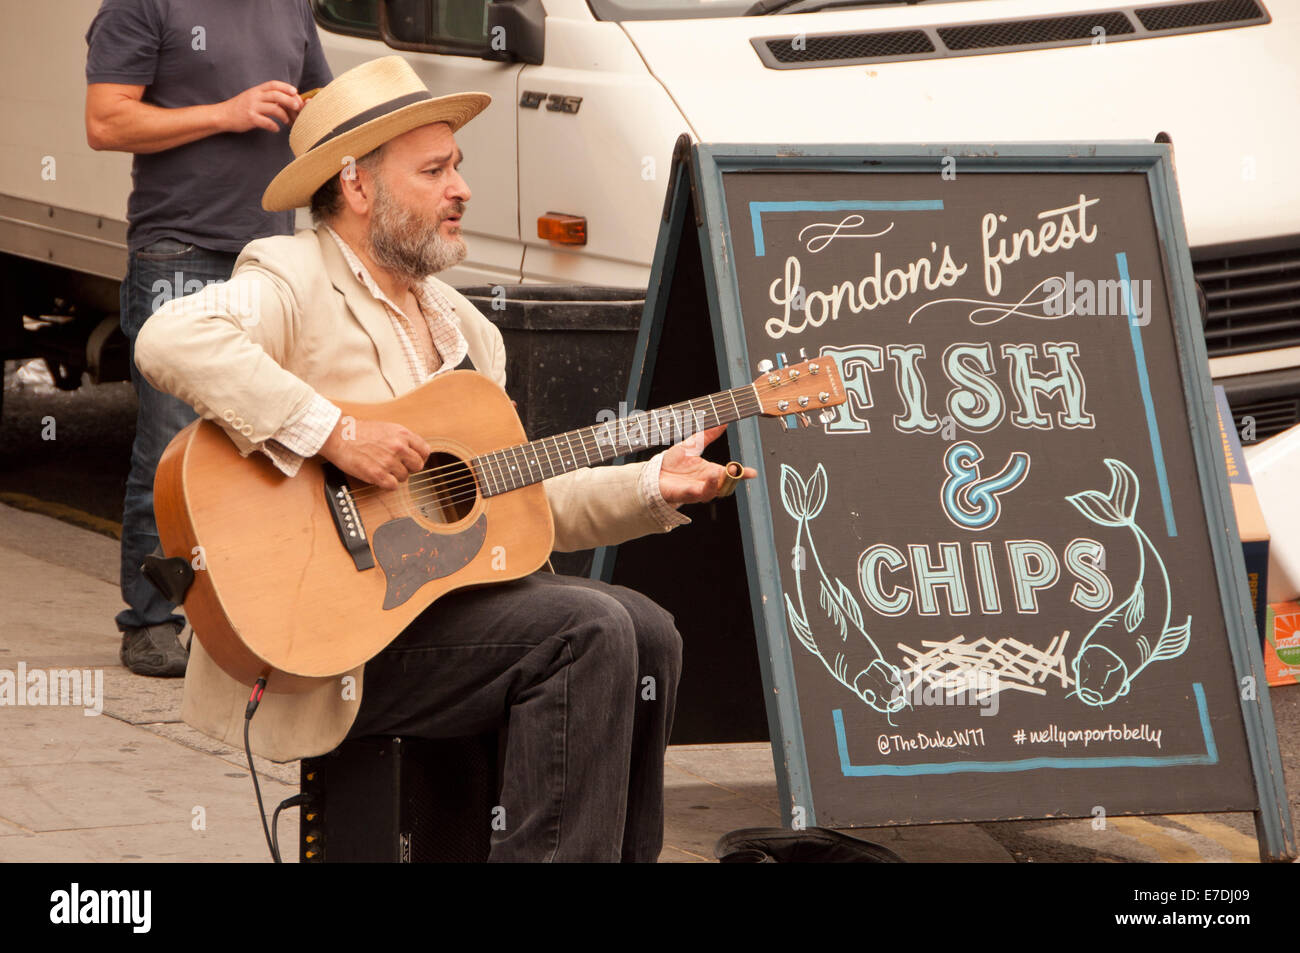 Guitar Busker on London Street with Fish & Chips Sign Stock Photo